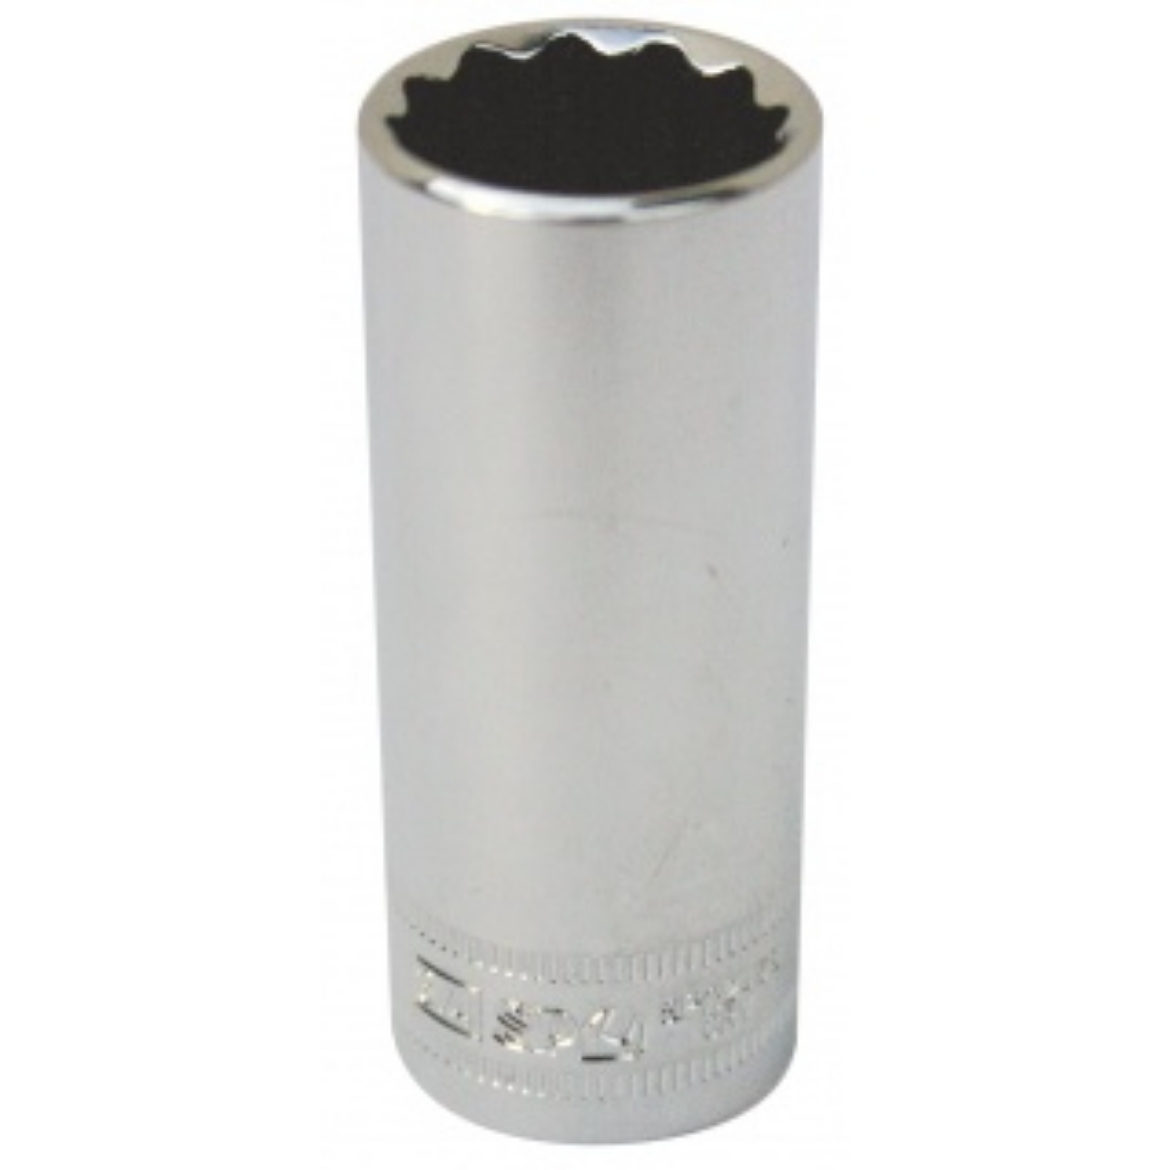 Picture of SOCKET DEEP 3/8"DR 12PT METRIC 19MM SP TOOLS